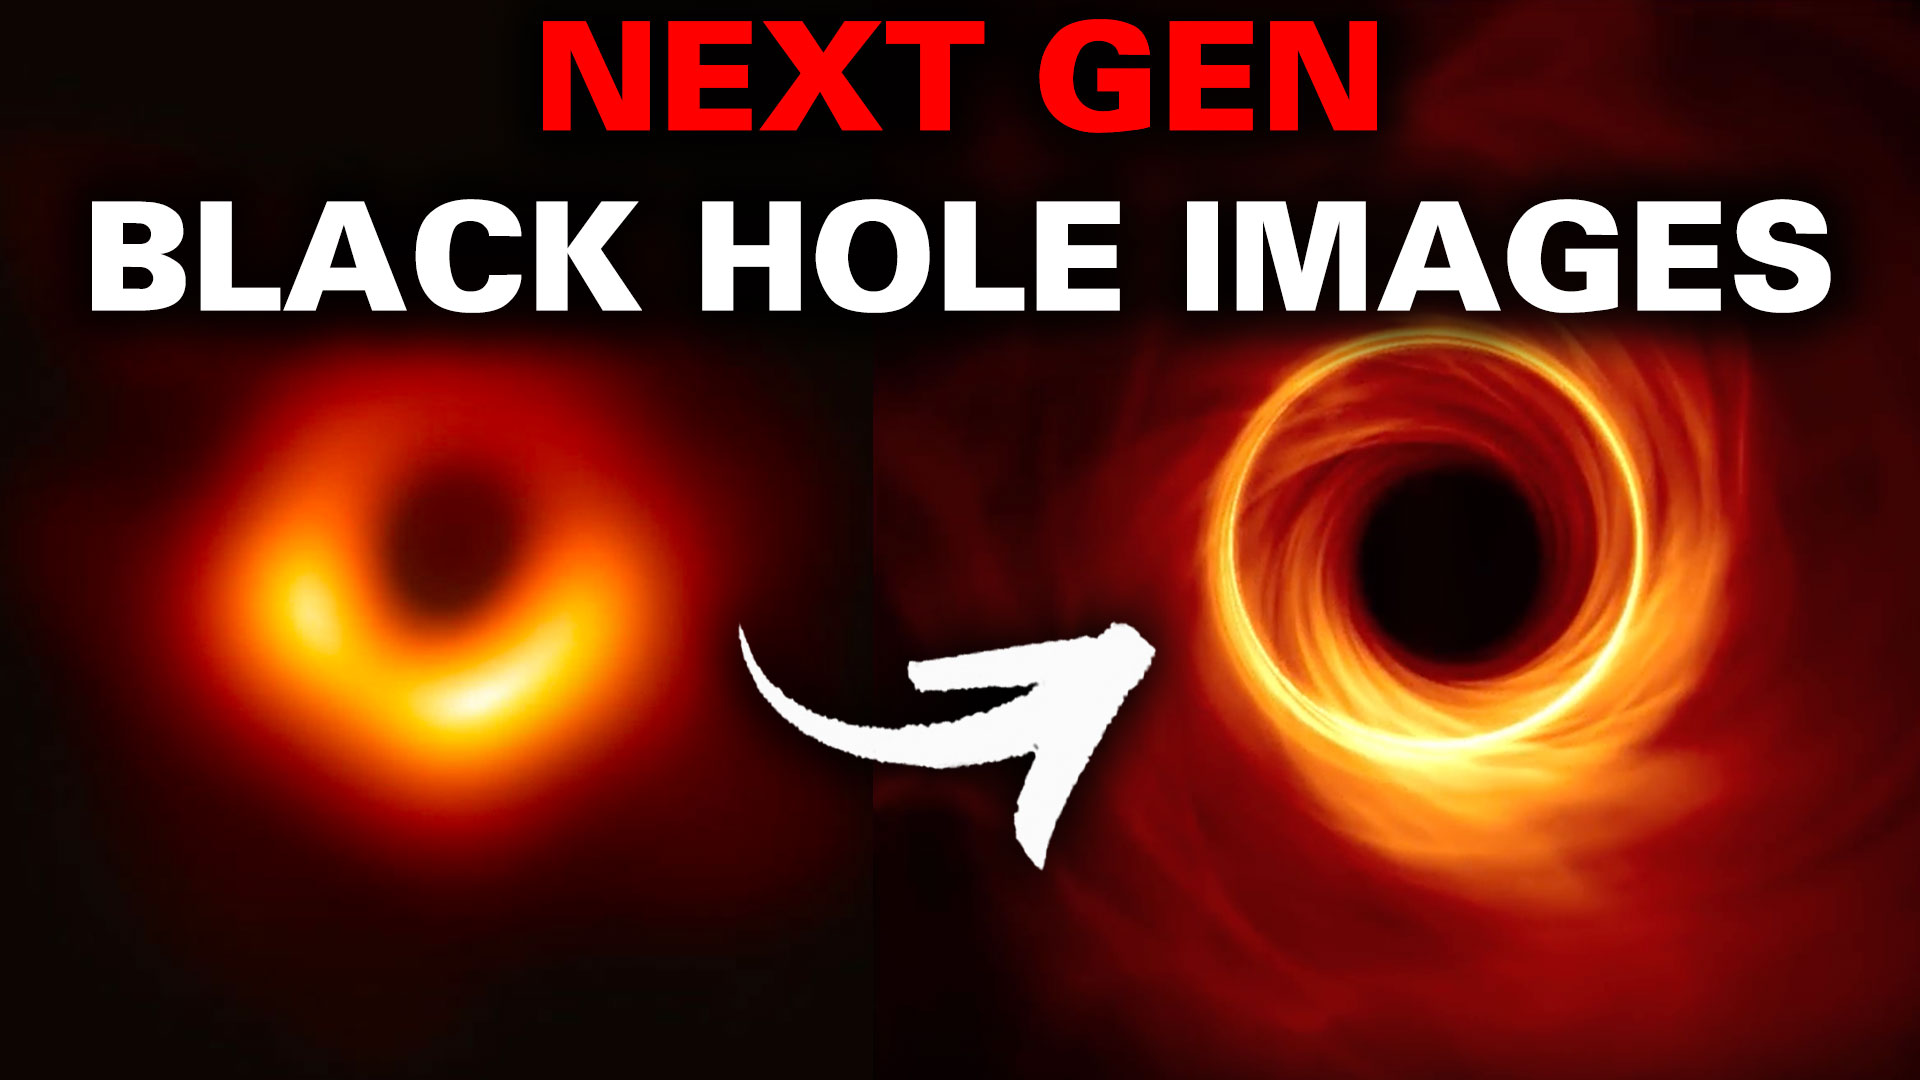 Image of the M87 black hole by EHT and a CGI image photon ring. Image credit: EHT, Center for Astrophysics | Harvard & Smithsonian